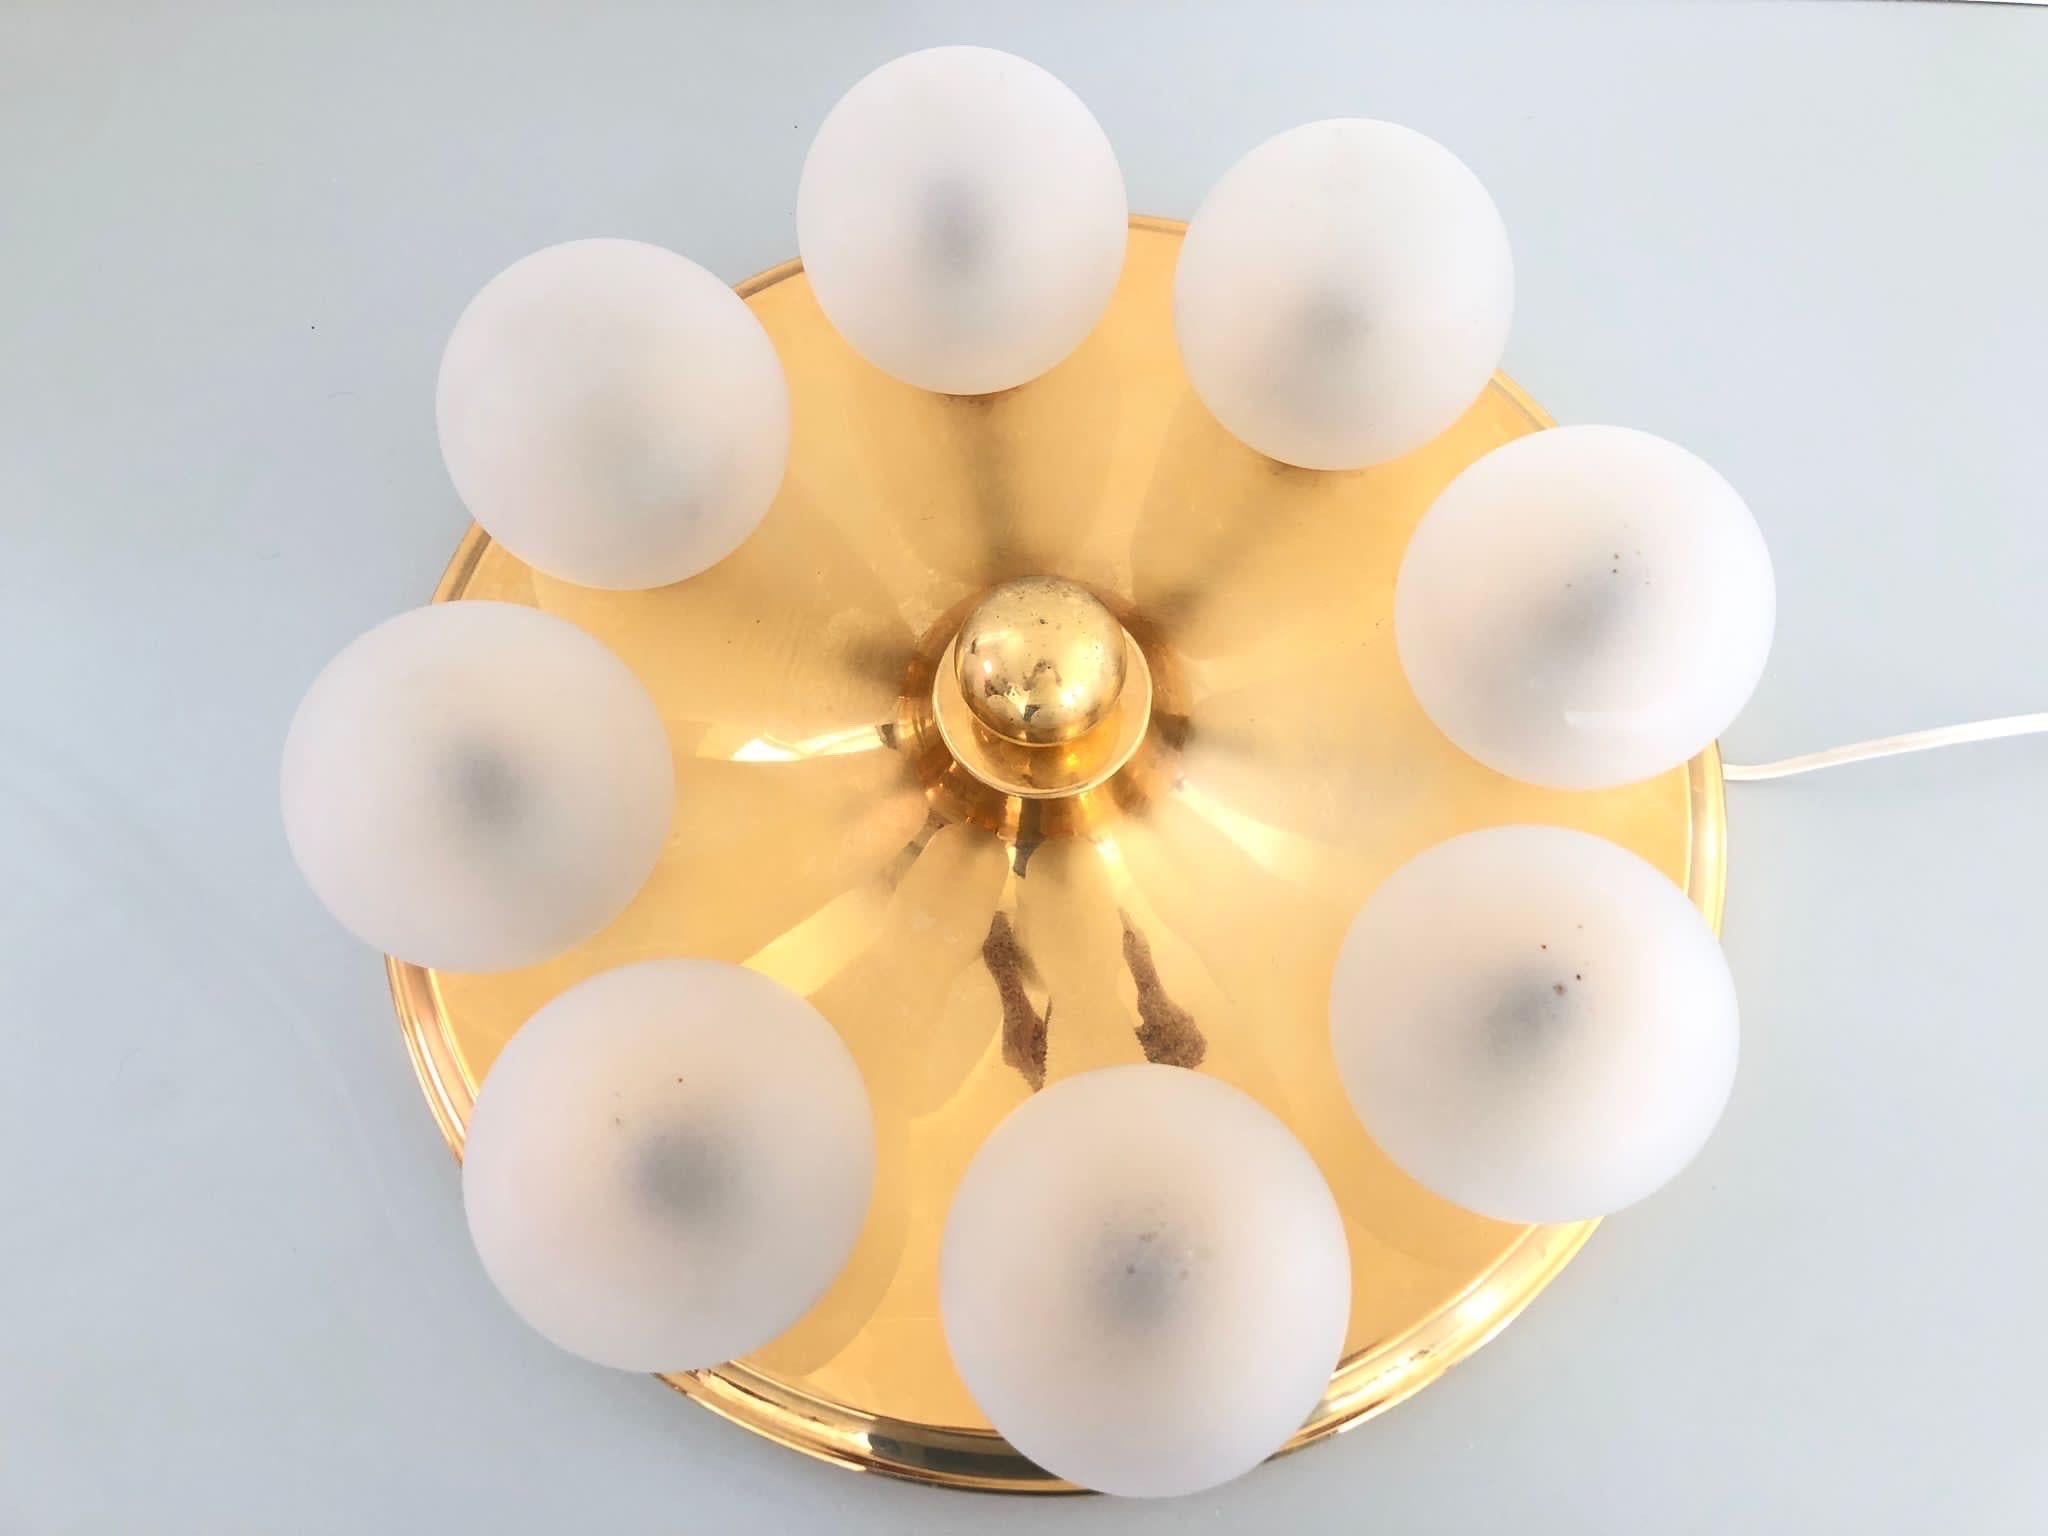 Atomic Age Gold Metal and 8 Ball Flush Mount Light by Kinkeldey, 1970s, Germany For Sale 5